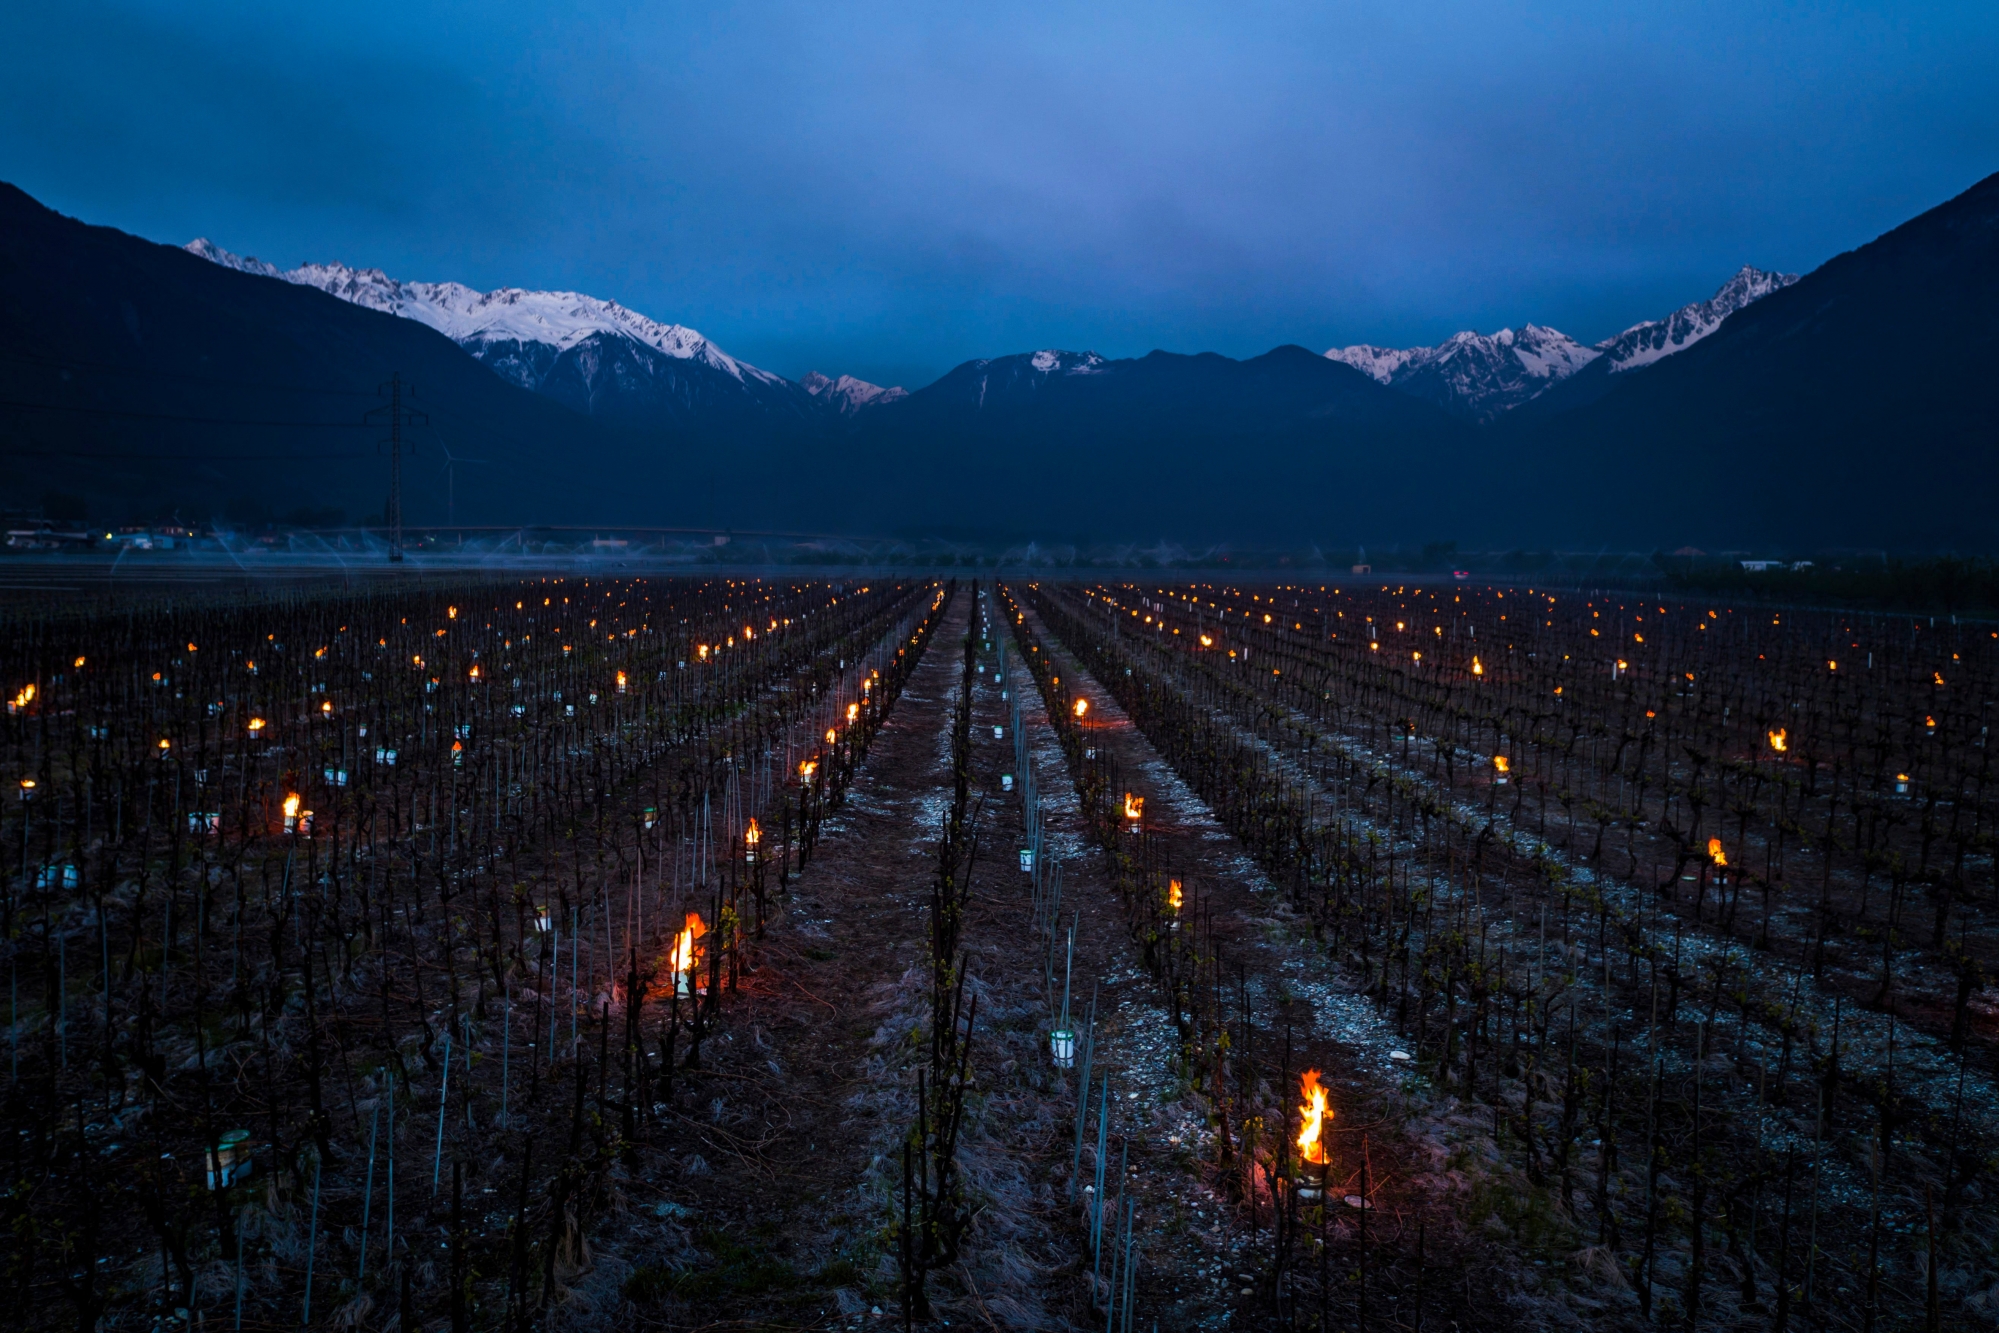 Anti-frost candles burn in a vineyard, in the middle of the Swiss Alps mountains, in Saxon, Canton of Valais, Switzerland, Thursday, April 20, 2017. Due to unusually low temperatures wine growers try to protect their grape shoots with anti-frost candles. (KEYSTONE/Valentin Flauraud)

Des bougies brulent afin de rechauffer l'air ambiant pour proteger la vigne ce jeudi 20 avril 2017 a Saxon dans le canton du Valais. (KEYSTONE/Valentin Flauraud) SUISSE VALAIS COMBAT CONTRE GEL